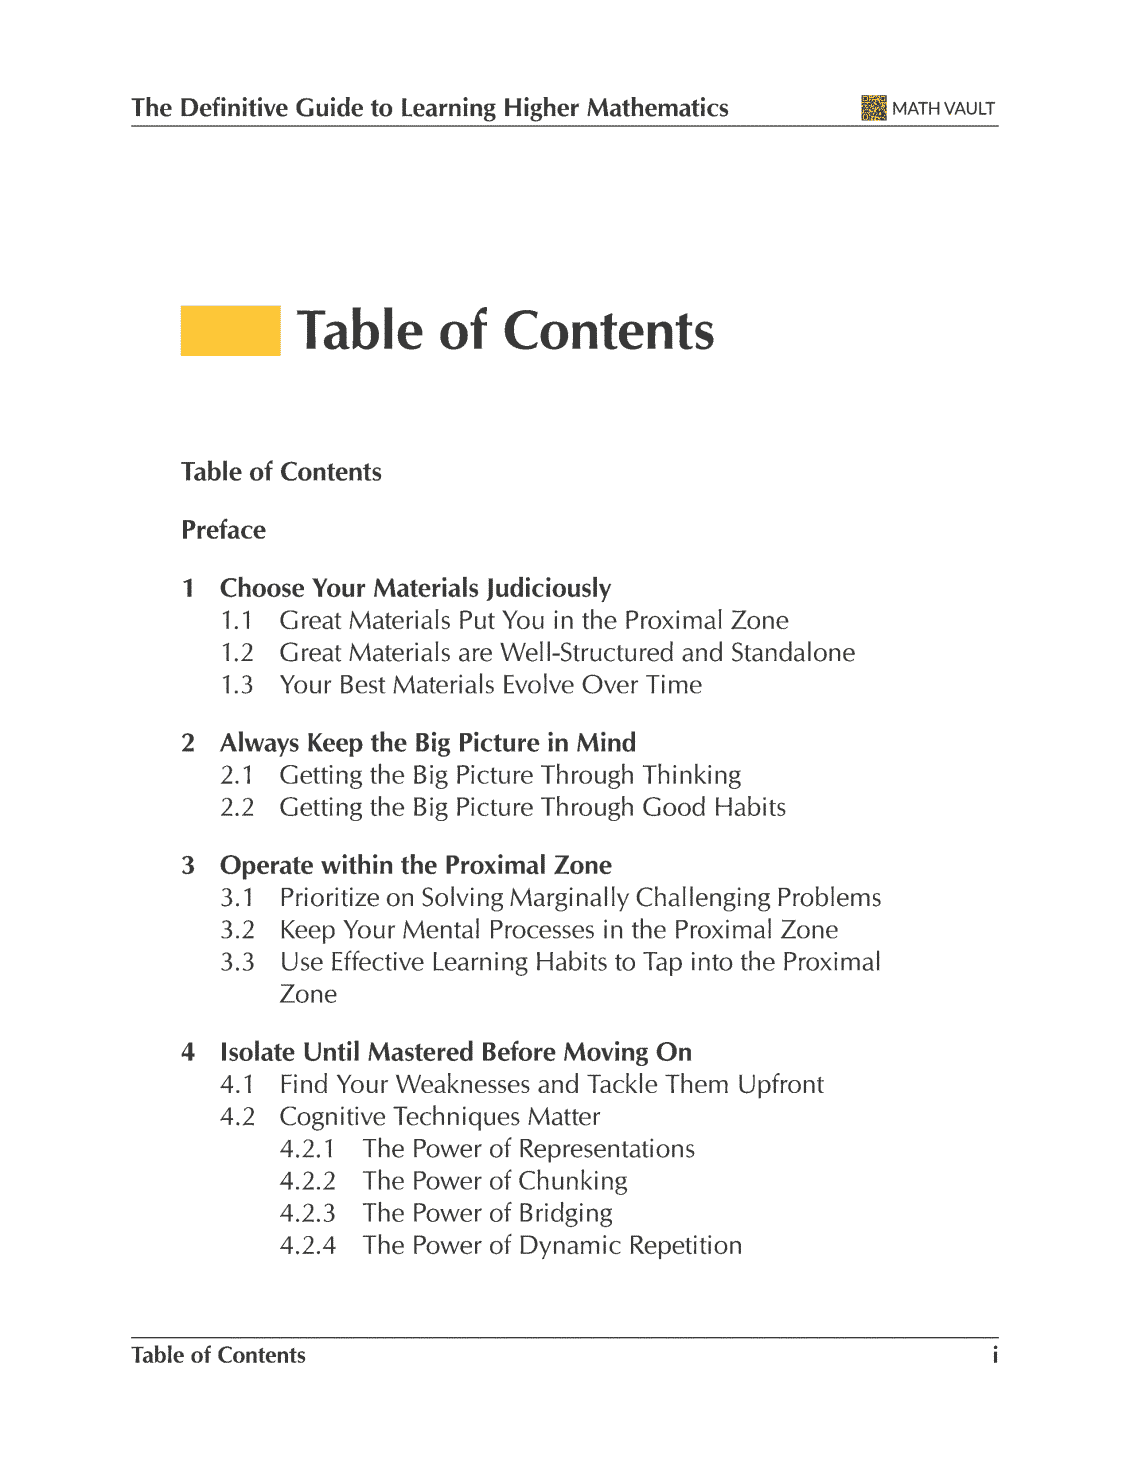 Table of contents (page 1) from Math Vault's The Definitive Guide to Learning Higher Mathematics